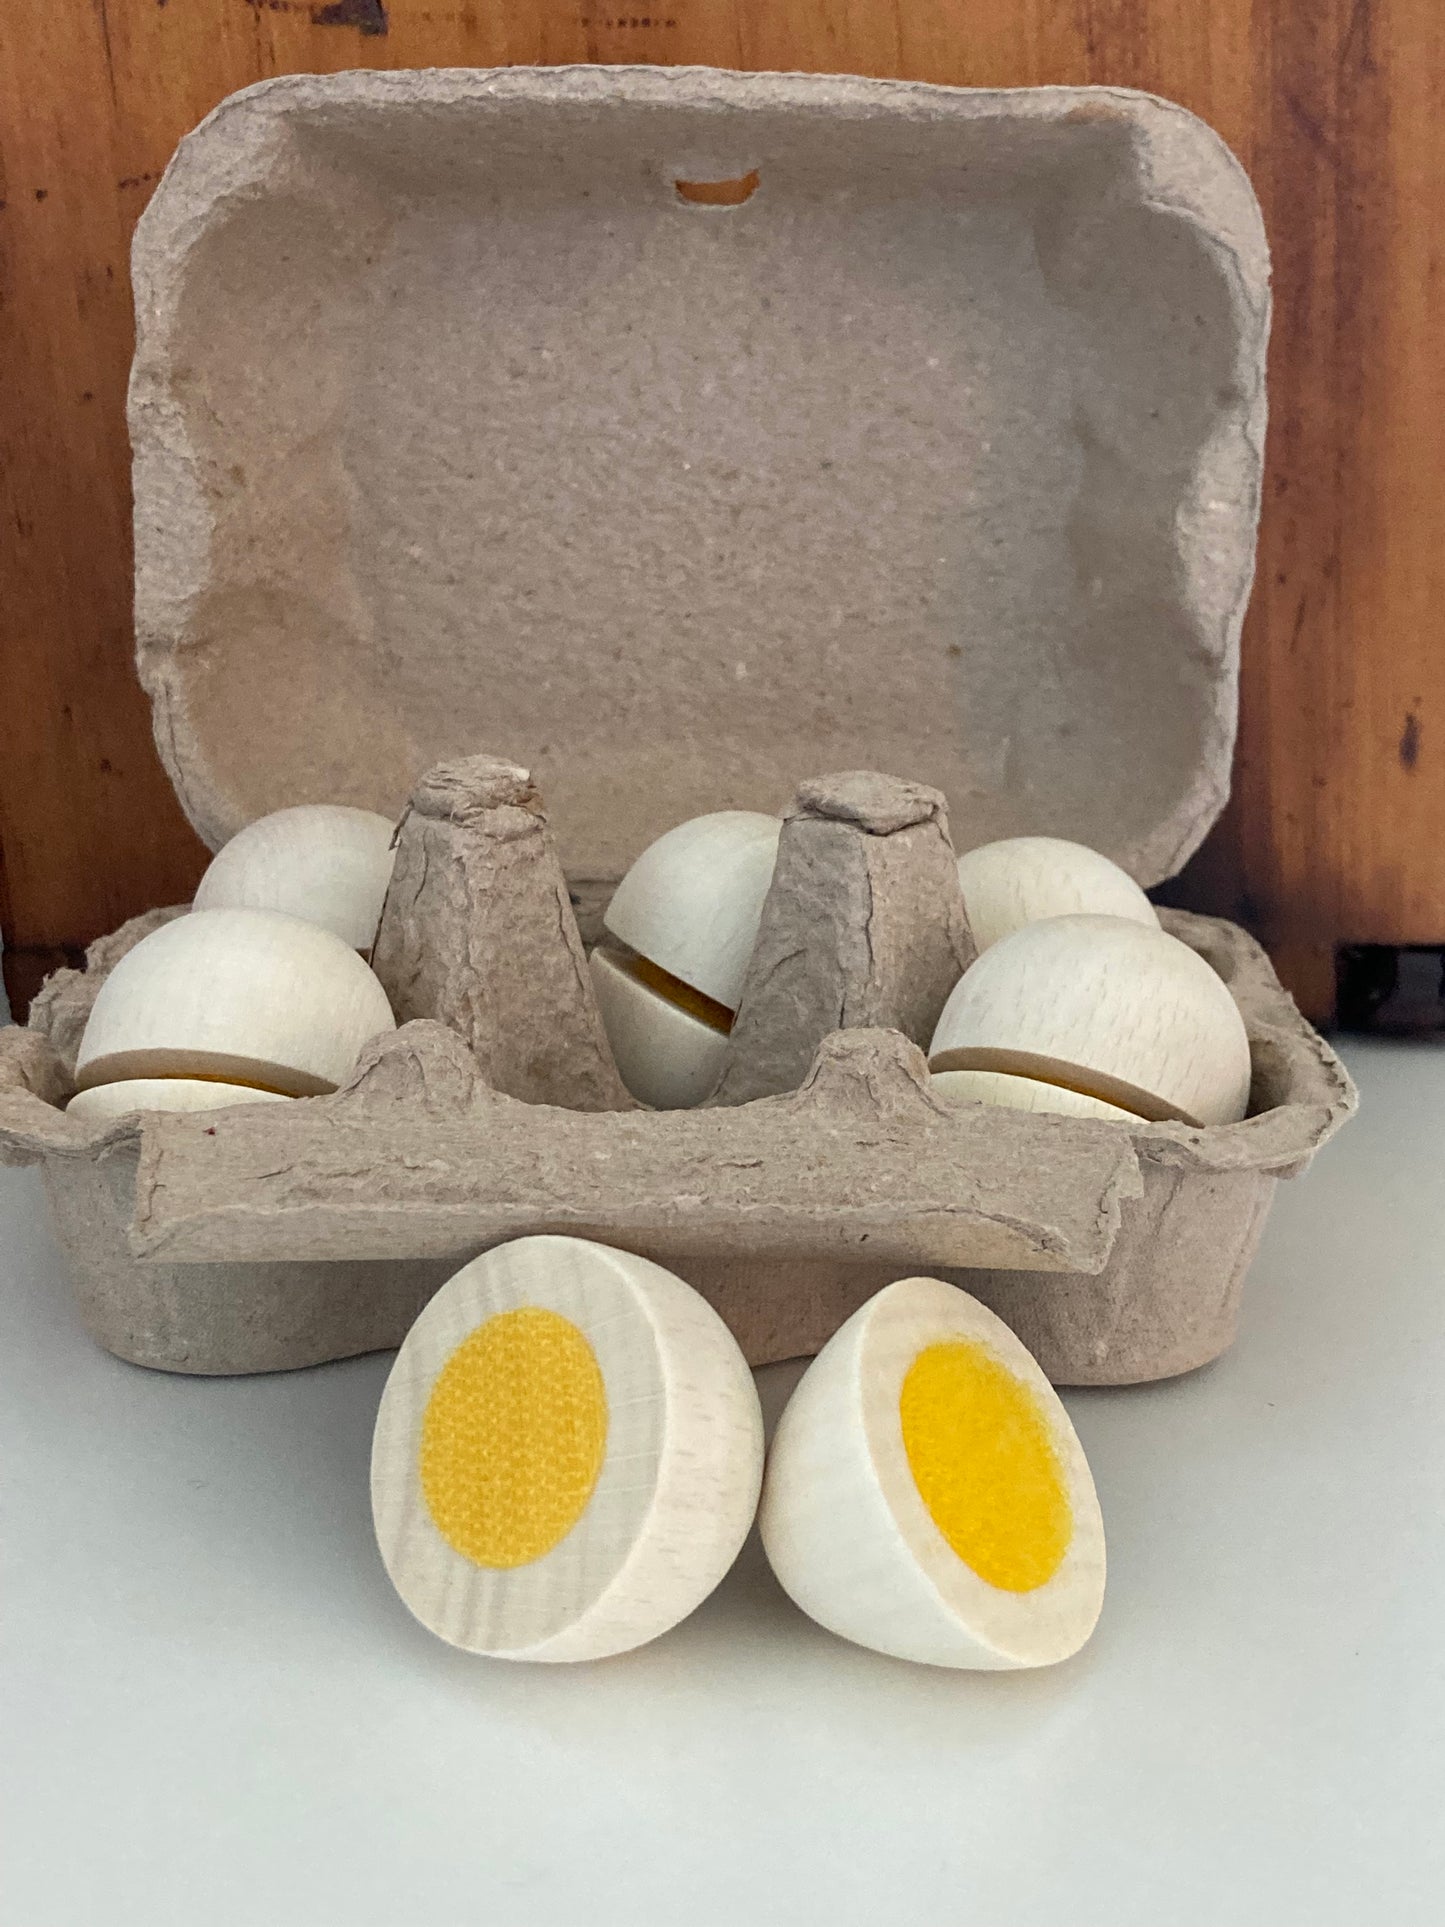 Kitchen Play Food - Wooden EGGS..."can be sliced in half!"